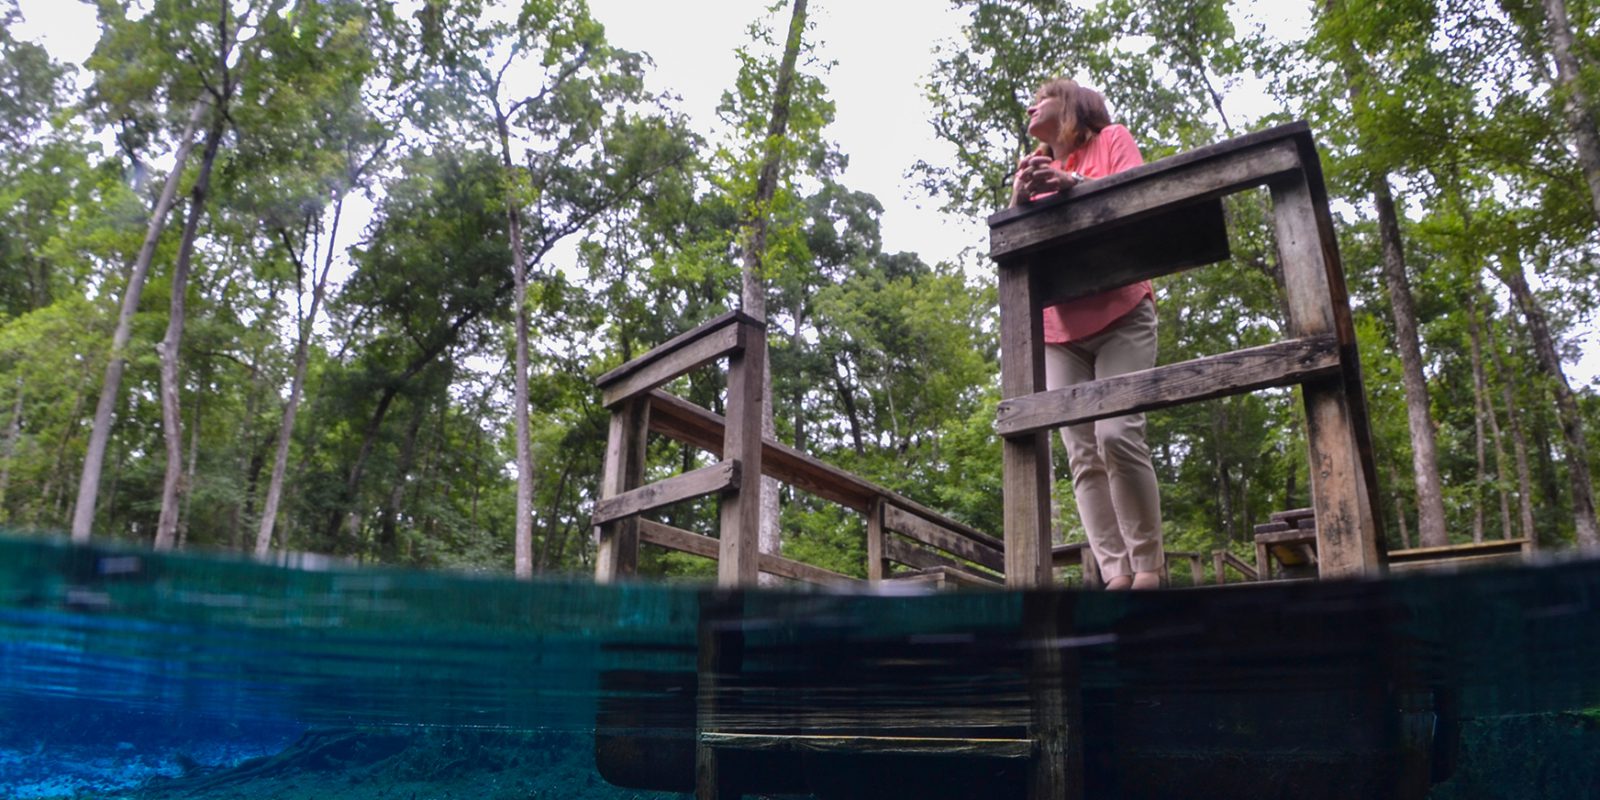 Photo taken with camera half-submerged in water of Dr. Graham looking out over the water from a dock